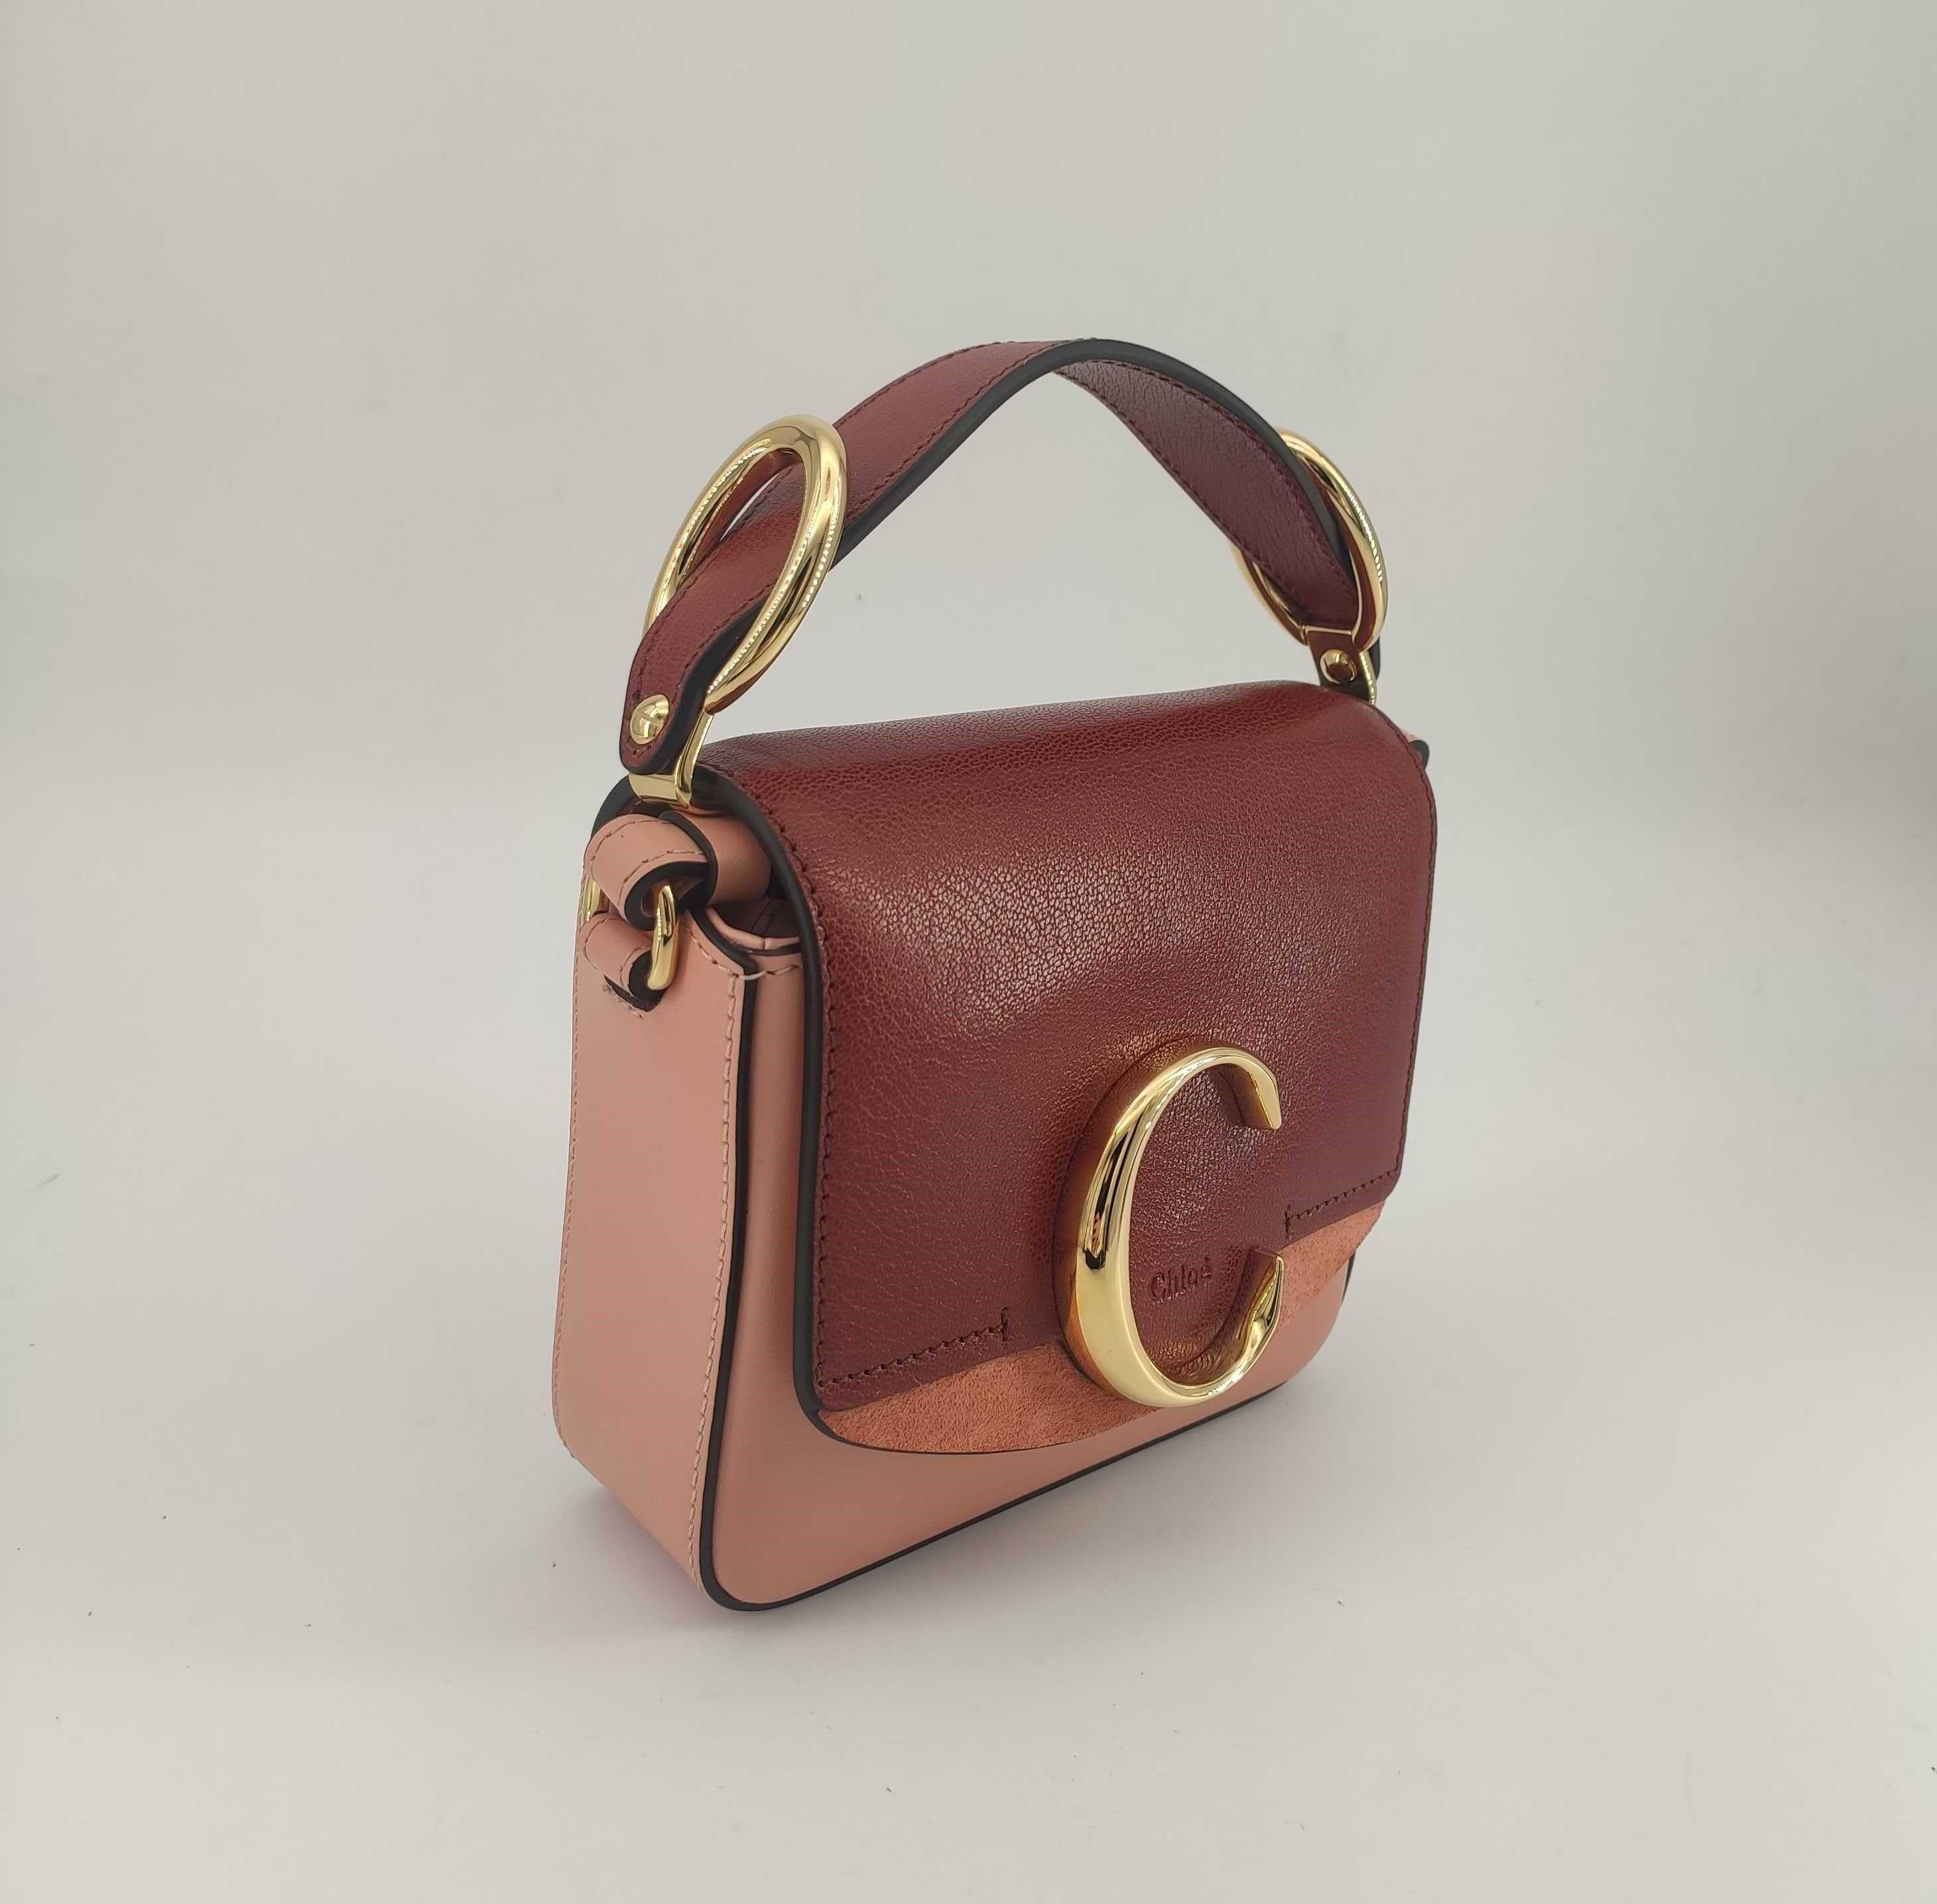 - Designer: CHLOÉ
- Model: C bag
- Condition: Very good condition. 
- Accessories: Dustbag, Authenticity Card
- Measurements: Width: 16cm, Height: 14cm, Depth: 5cm, Strap: 148cm
- Exterior Material: Leather
- Exterior Color: Red
- Interior Material: